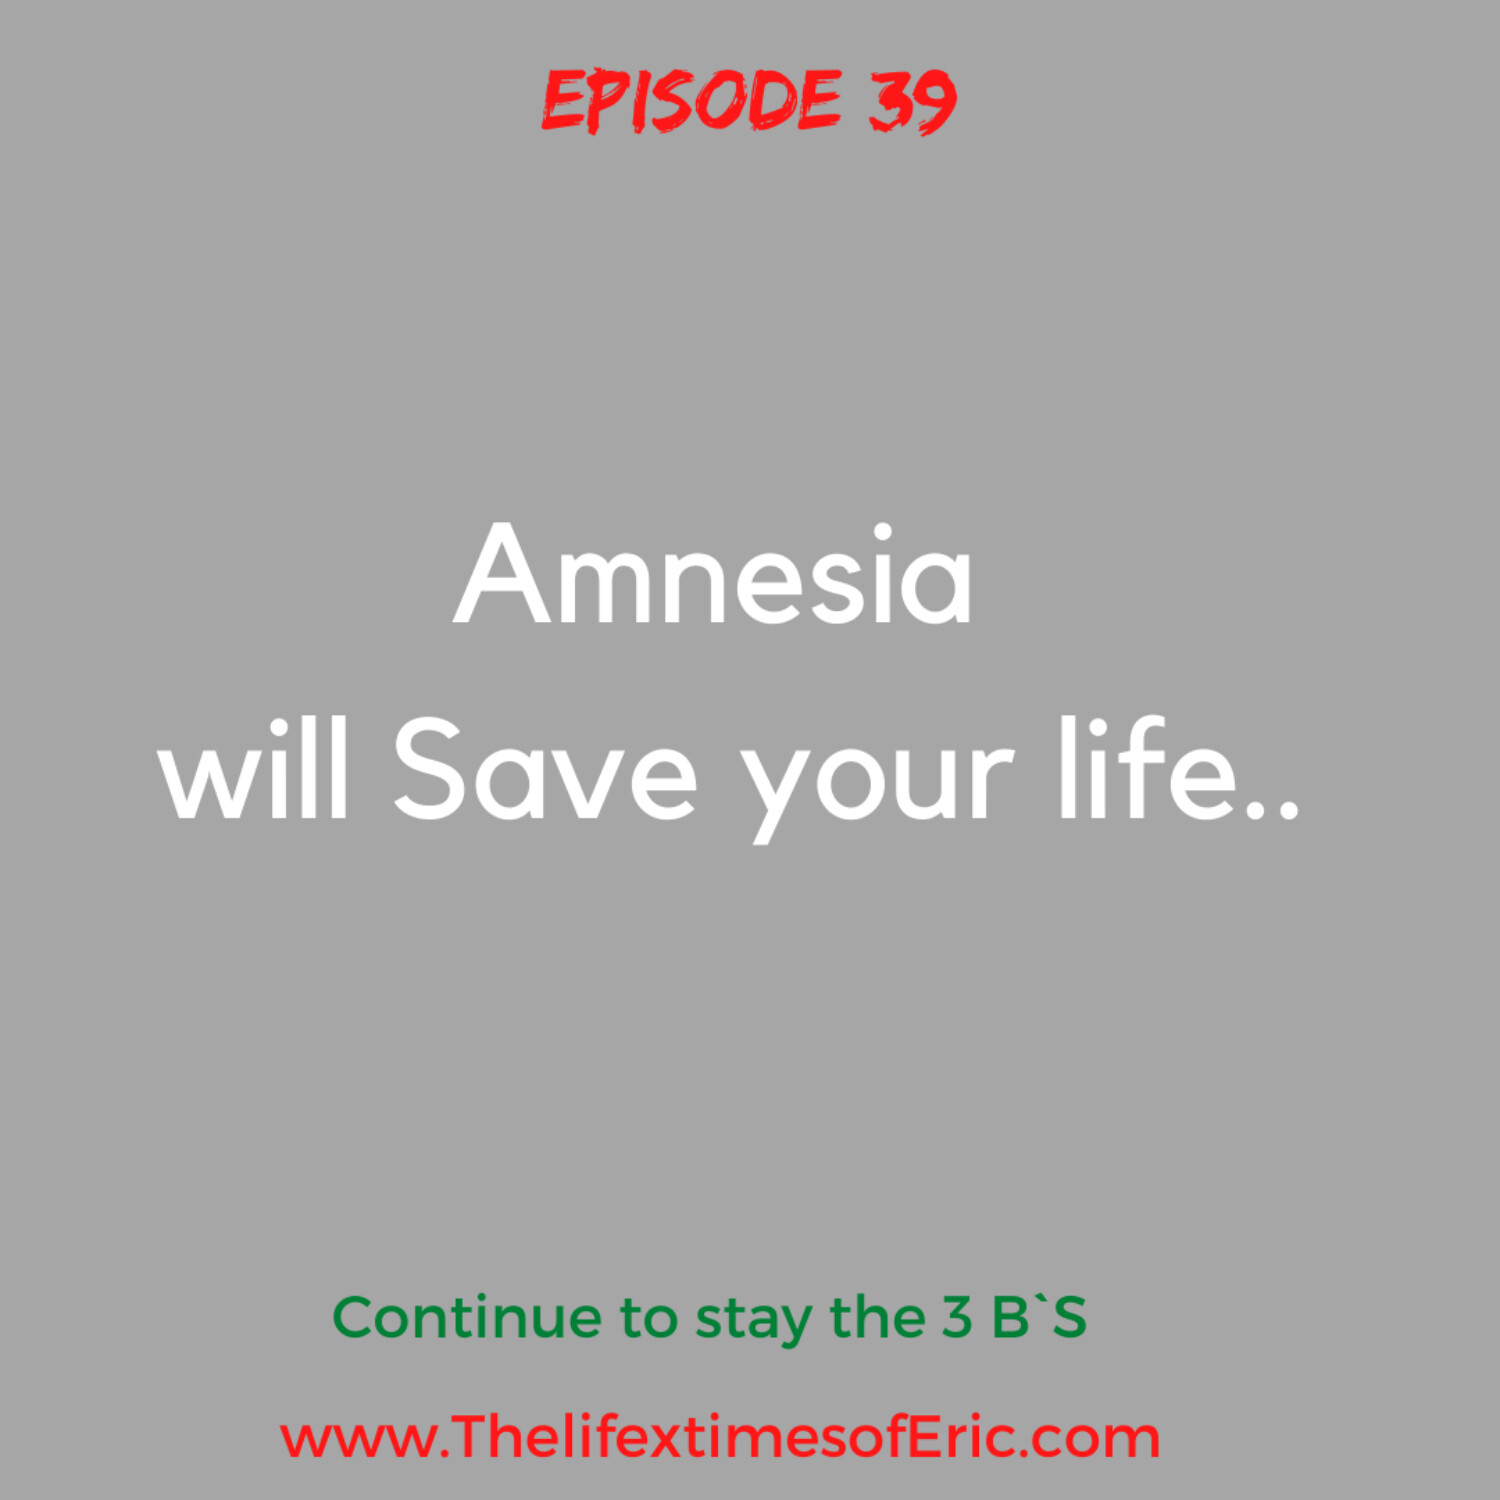 Amnesia. Will save your life.